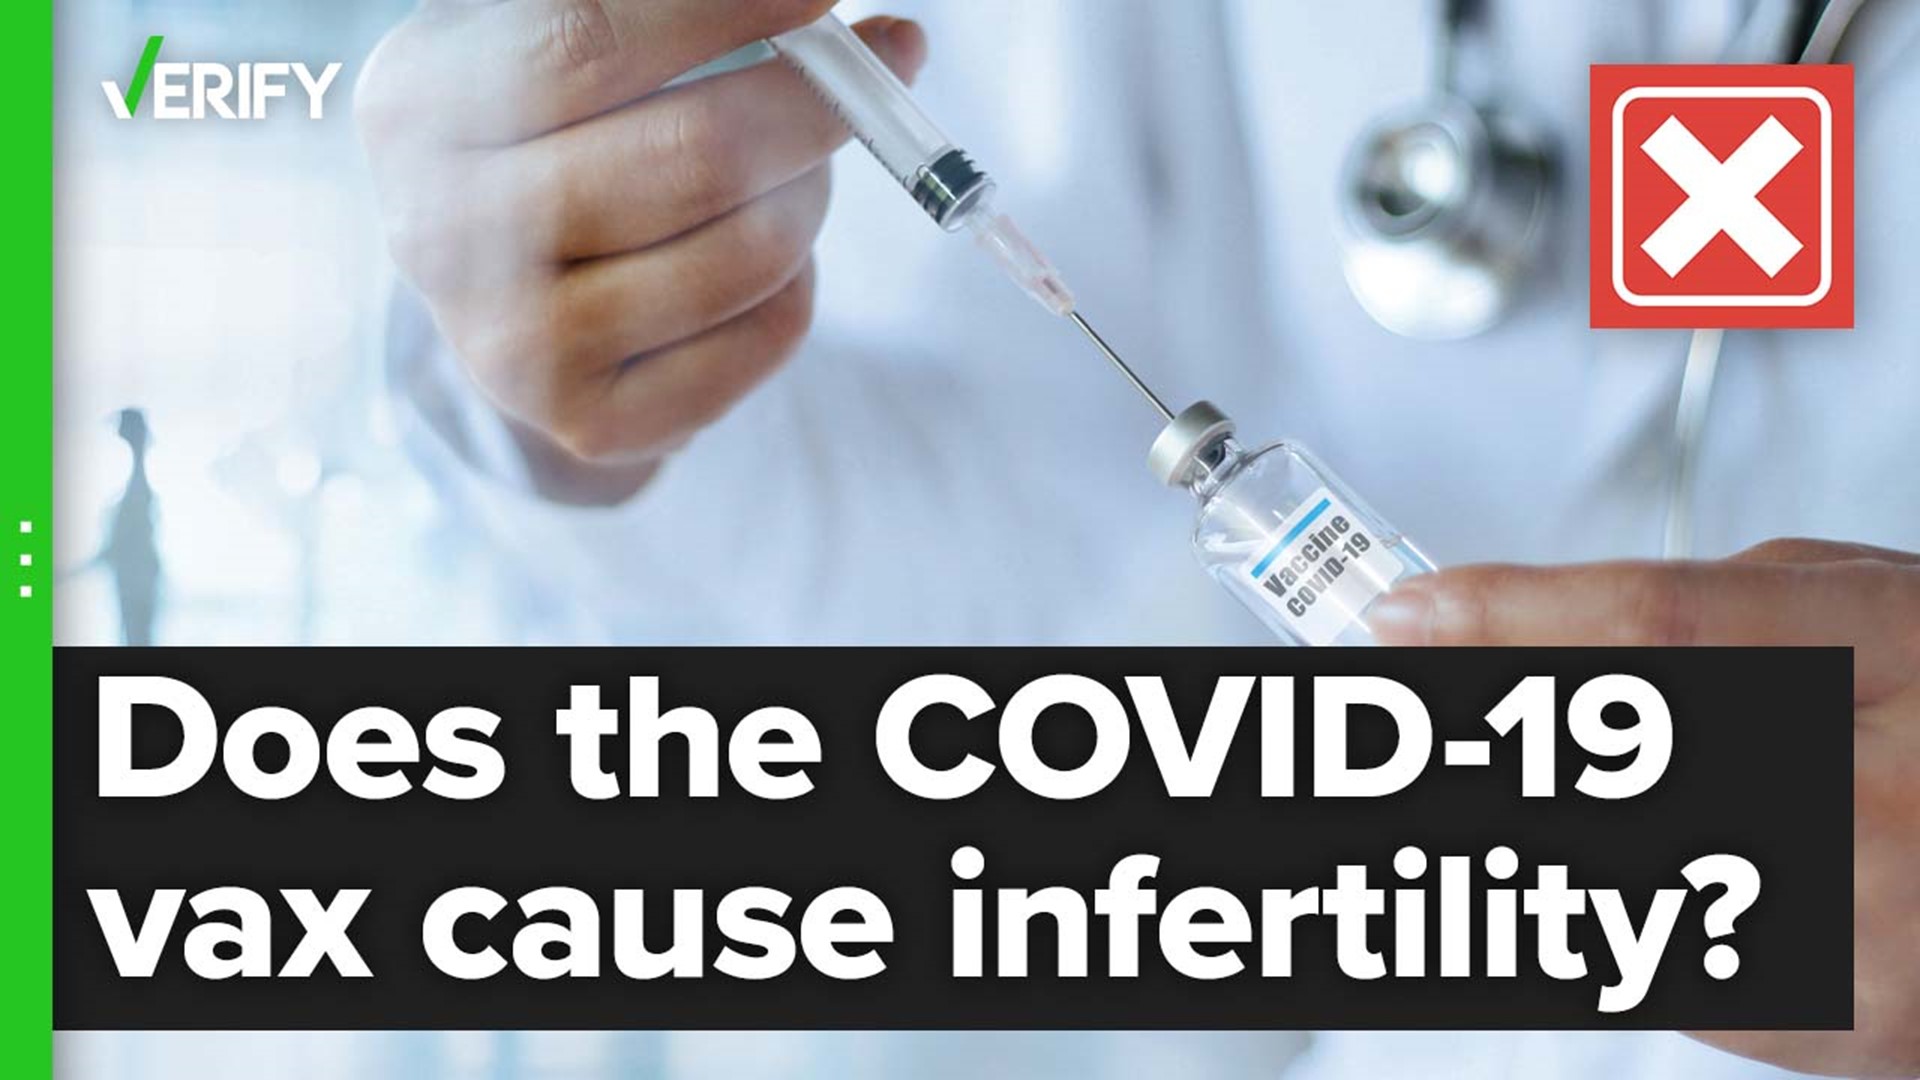 Studies have shown no difference in fertility among vaccinated and unvaccinated people. But COVID-19 infection may cause a short-term decline in male fertility.